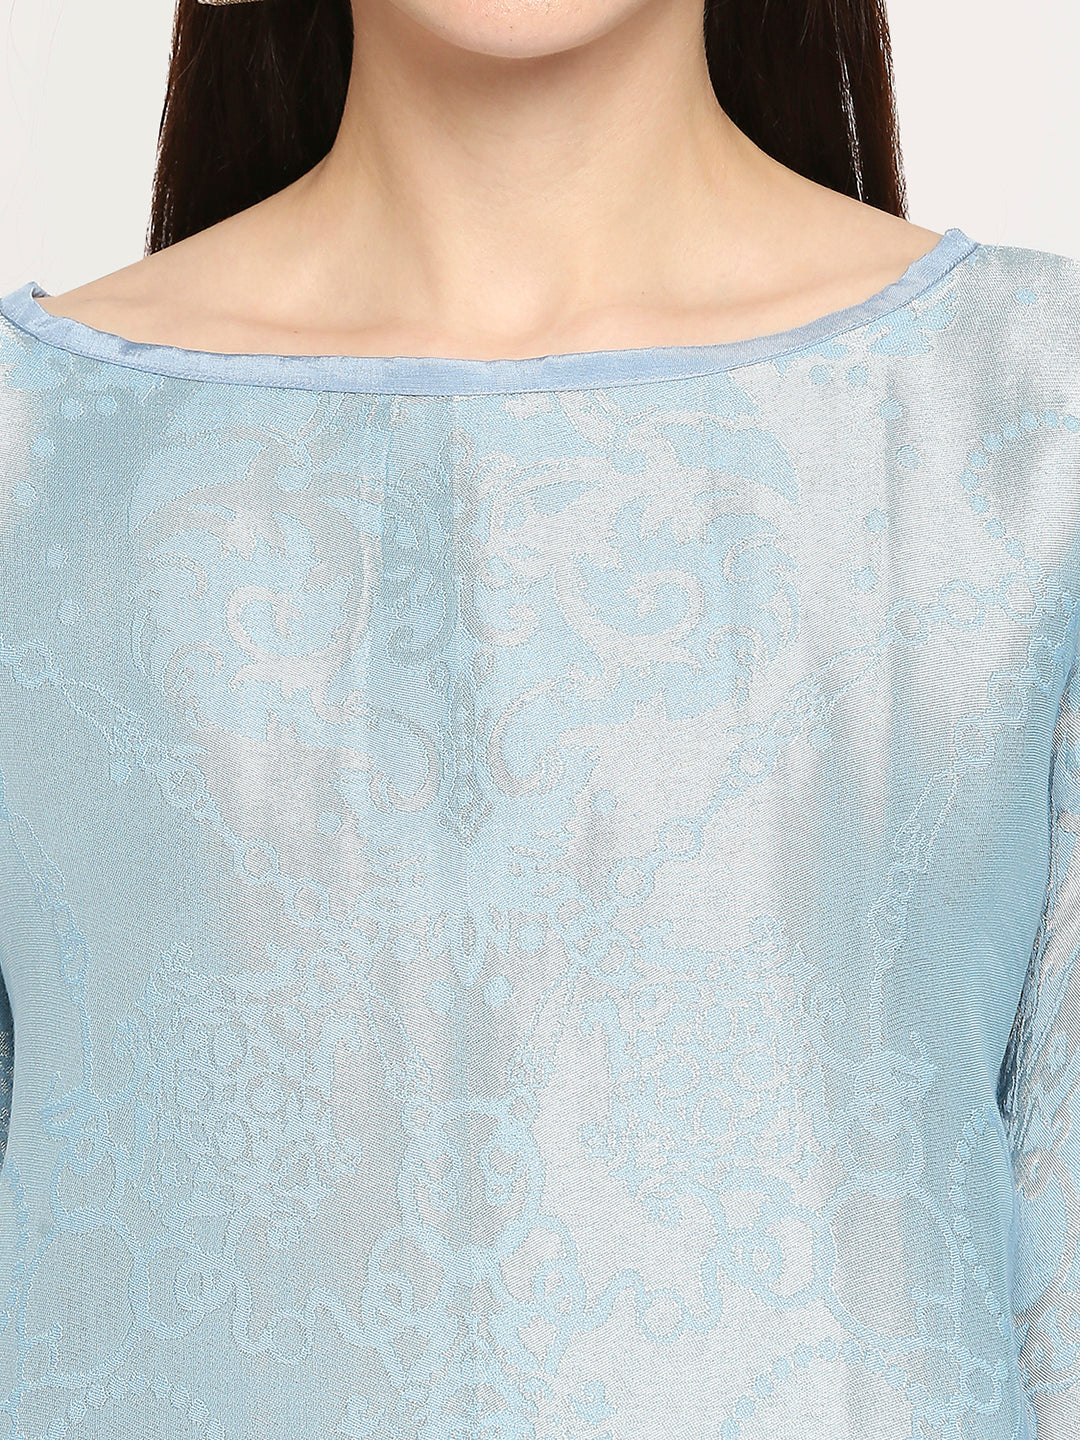 French Rope & Chains Patterned Ice Blue Brocade short Kaftan